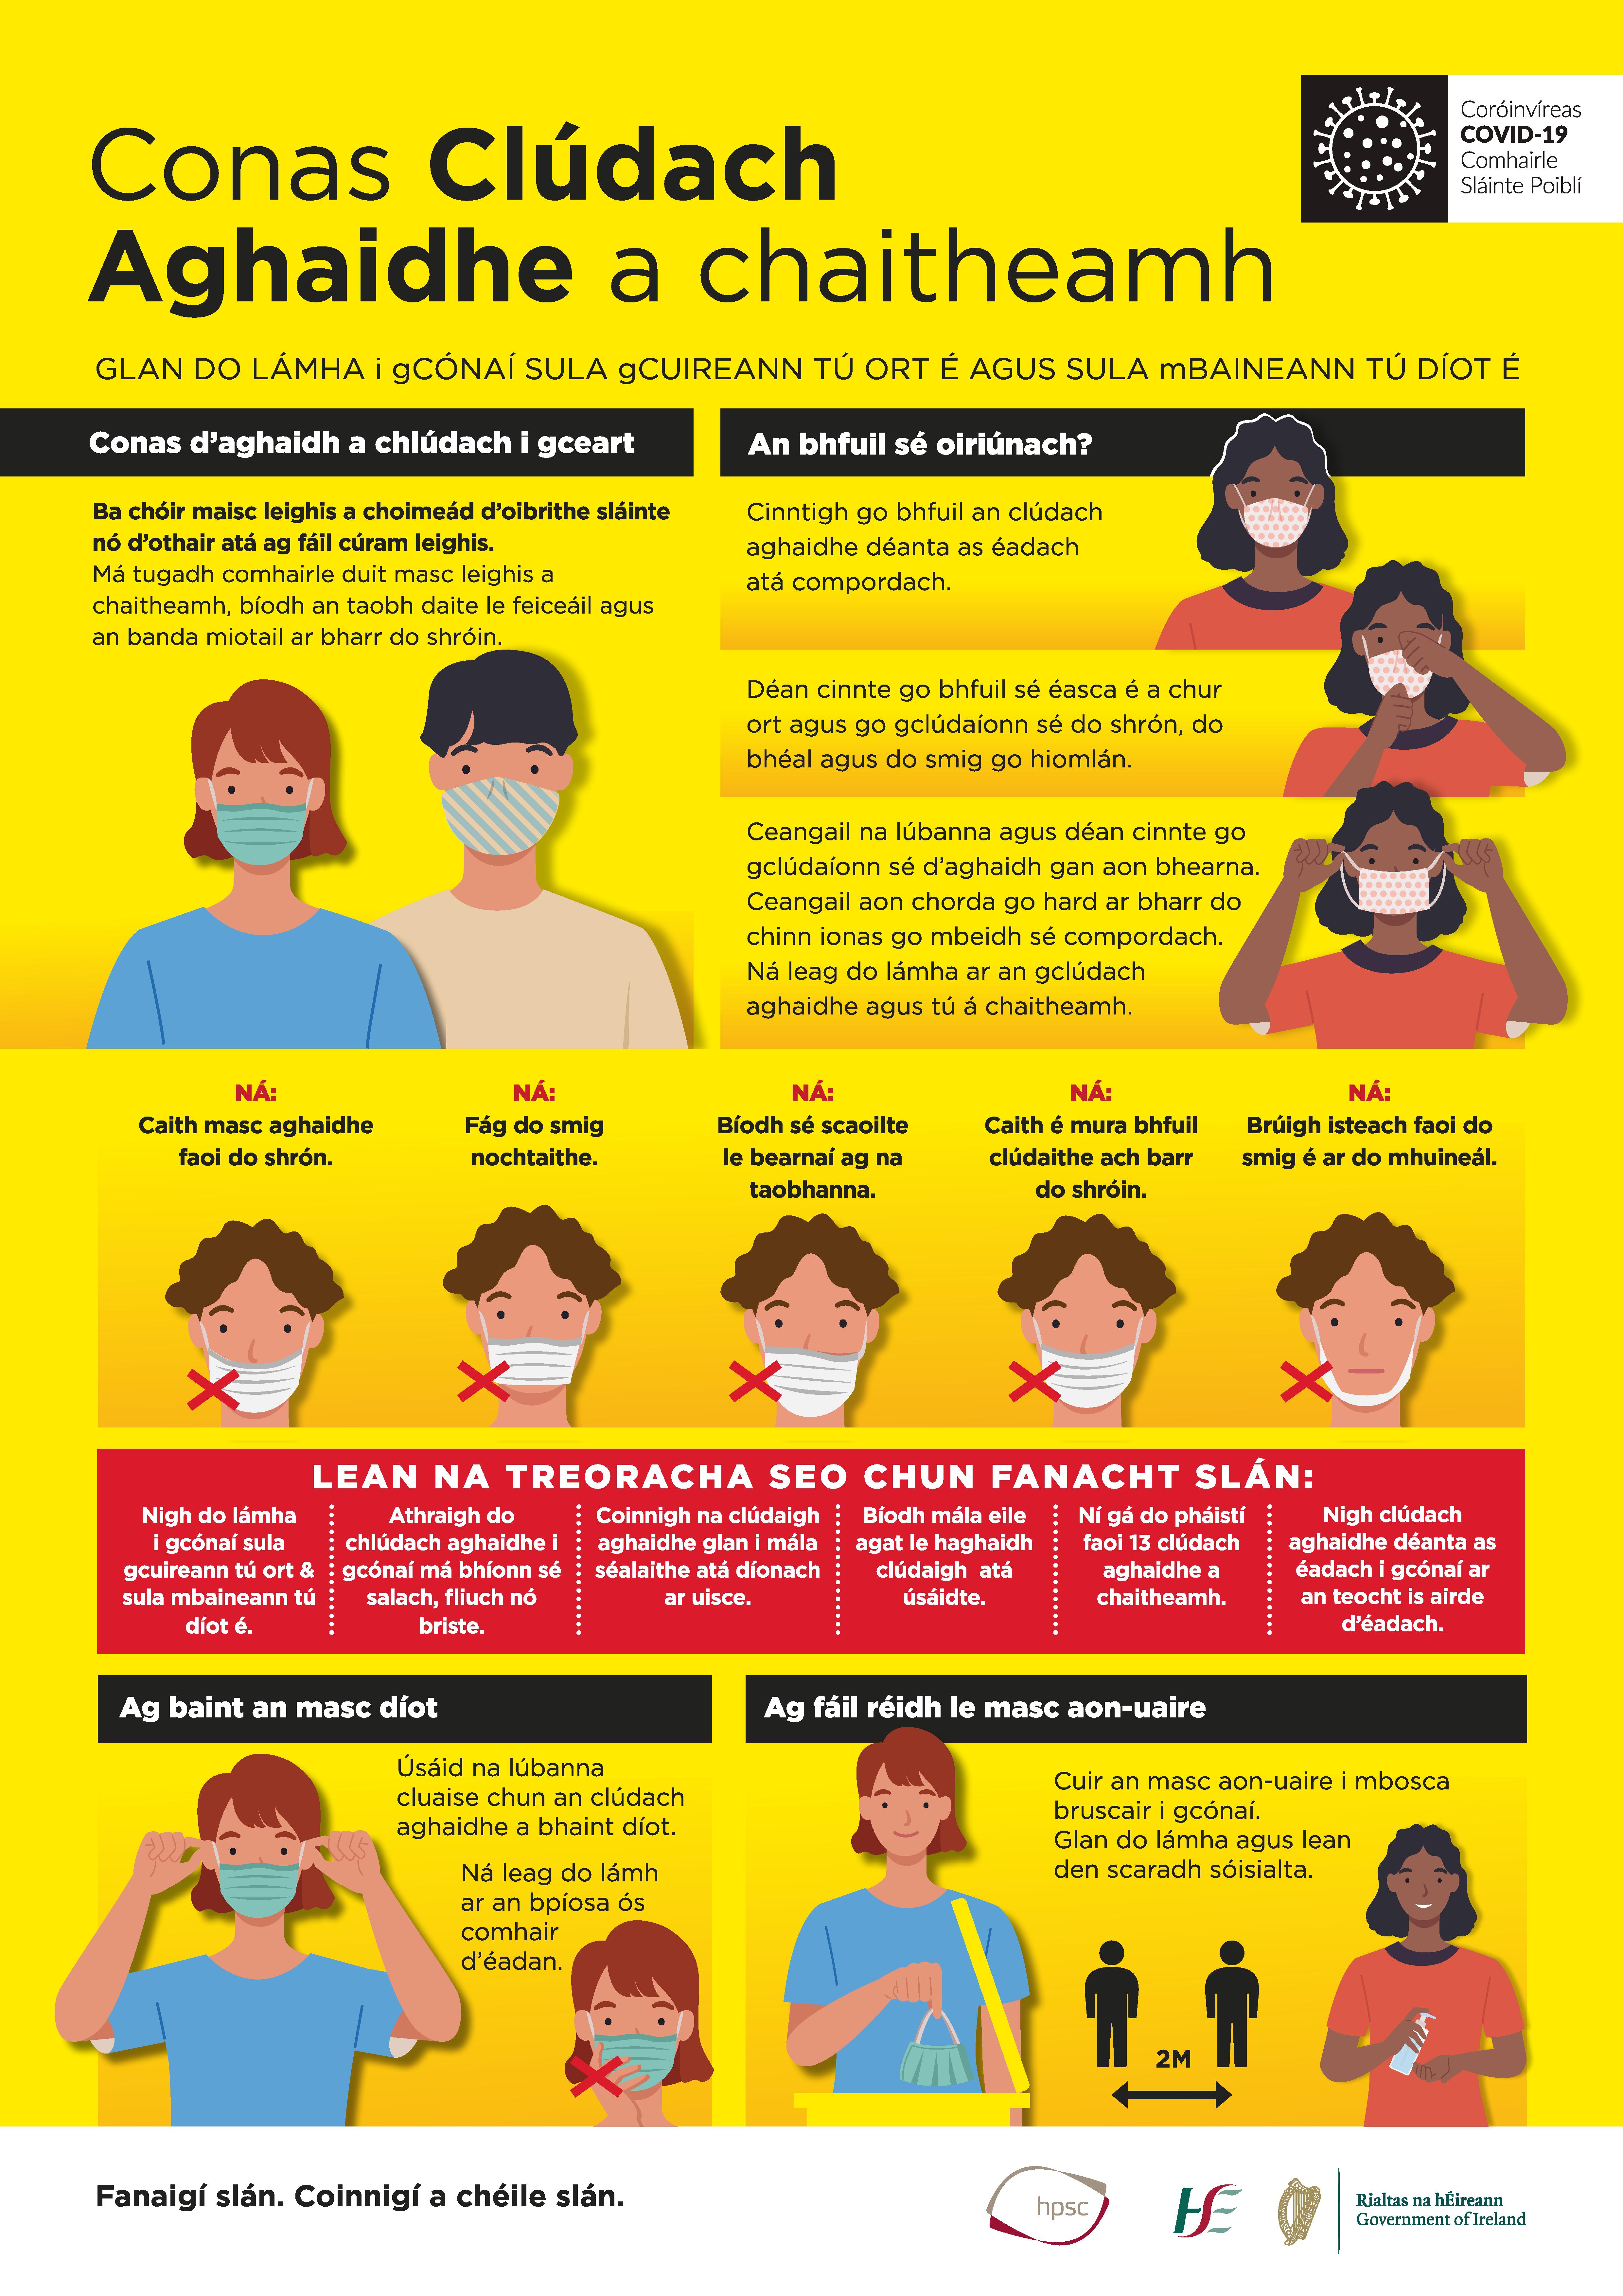 covid-19-face-covering-guidelines-poster